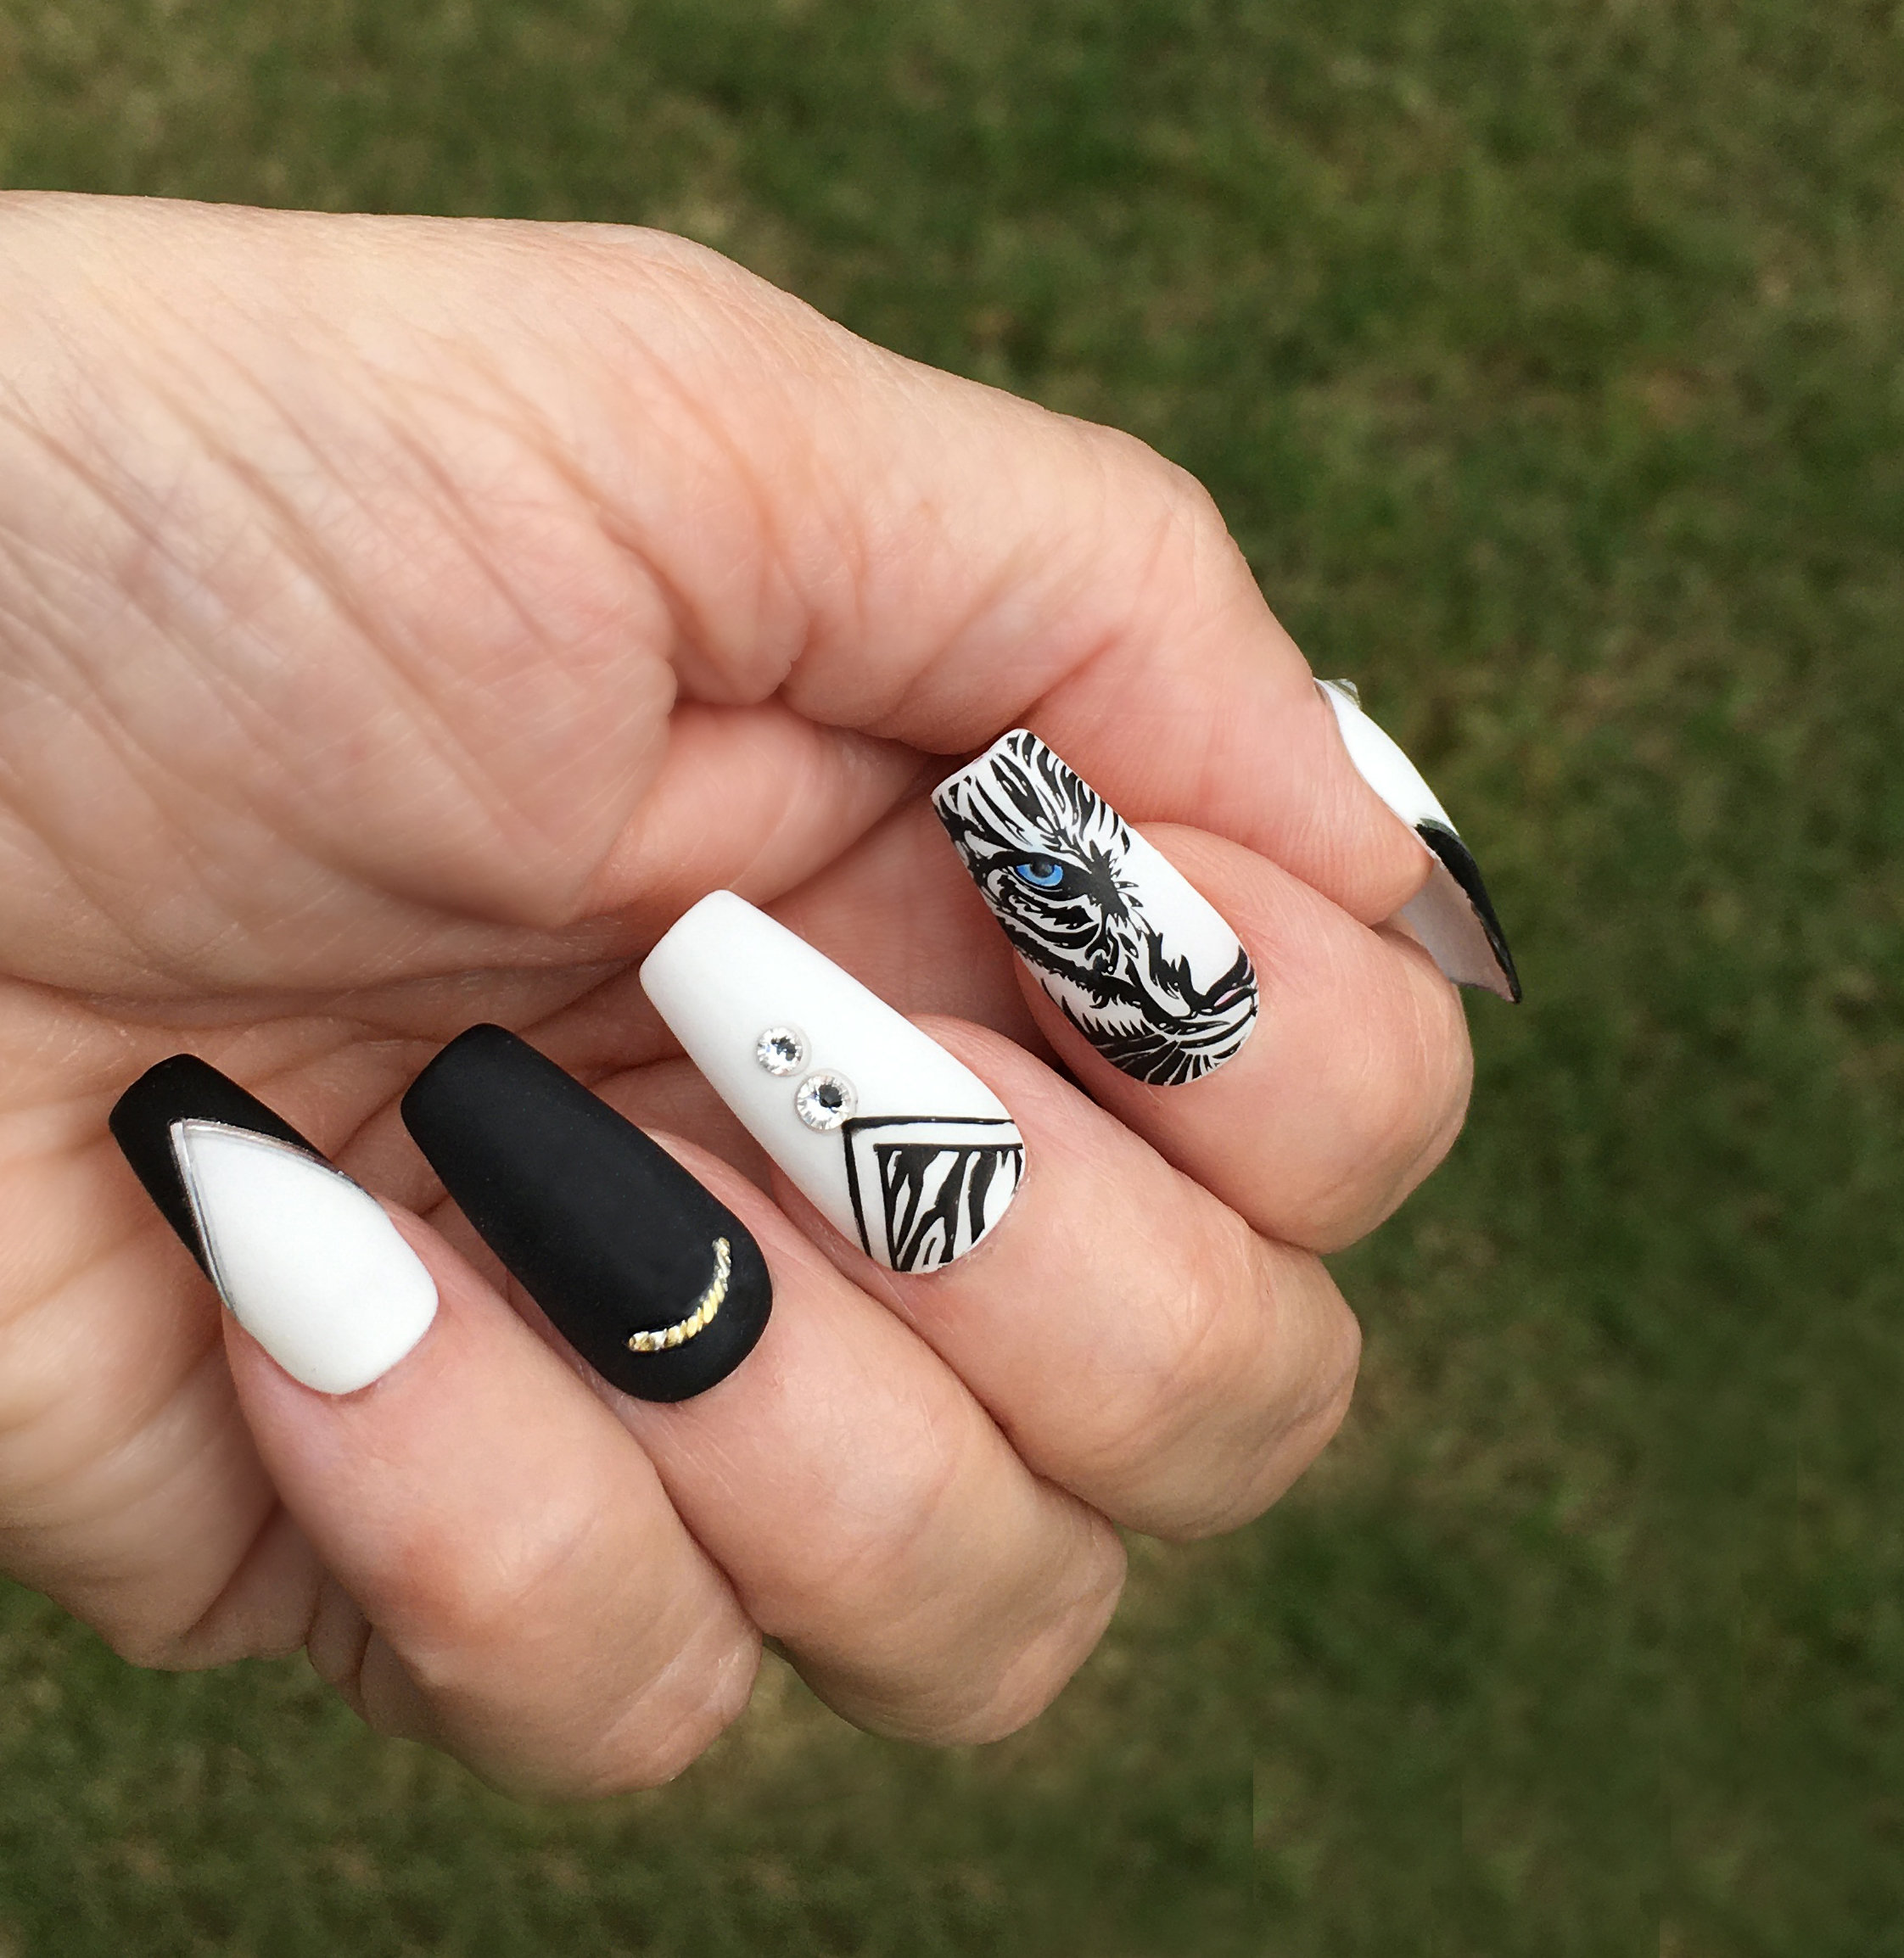 Decorated nails in black and white